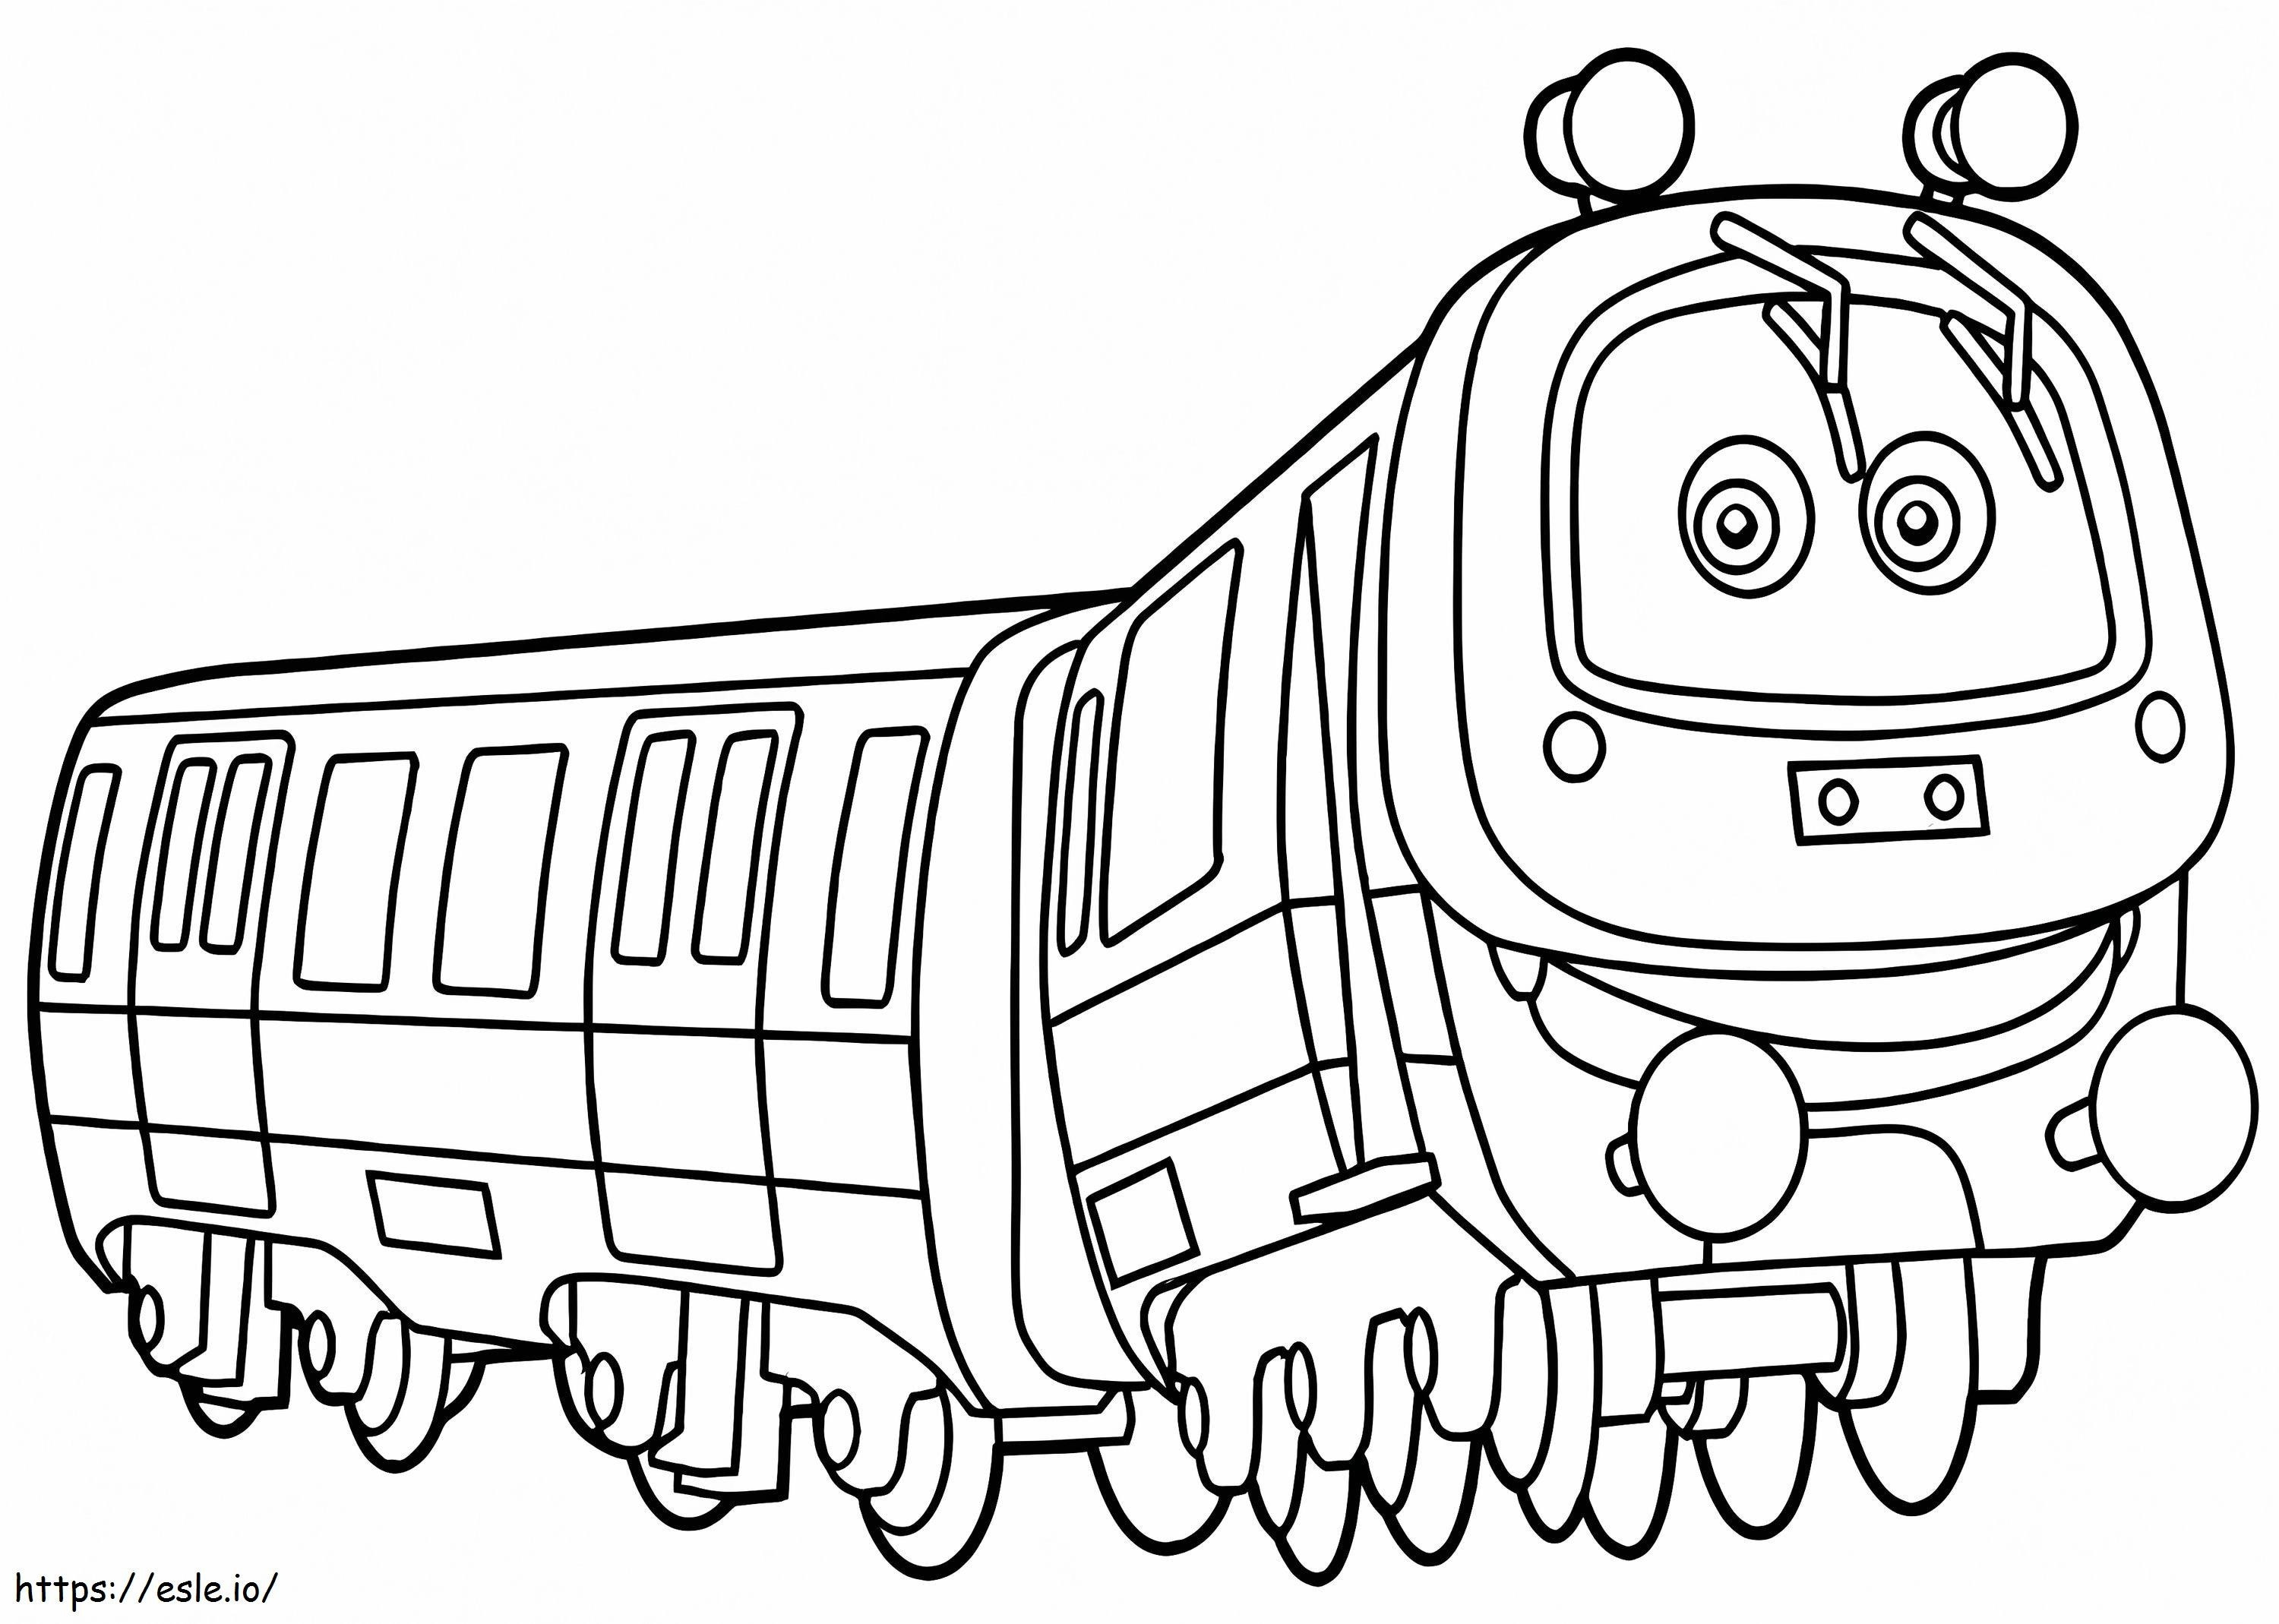 Emery From Chuggington coloring page